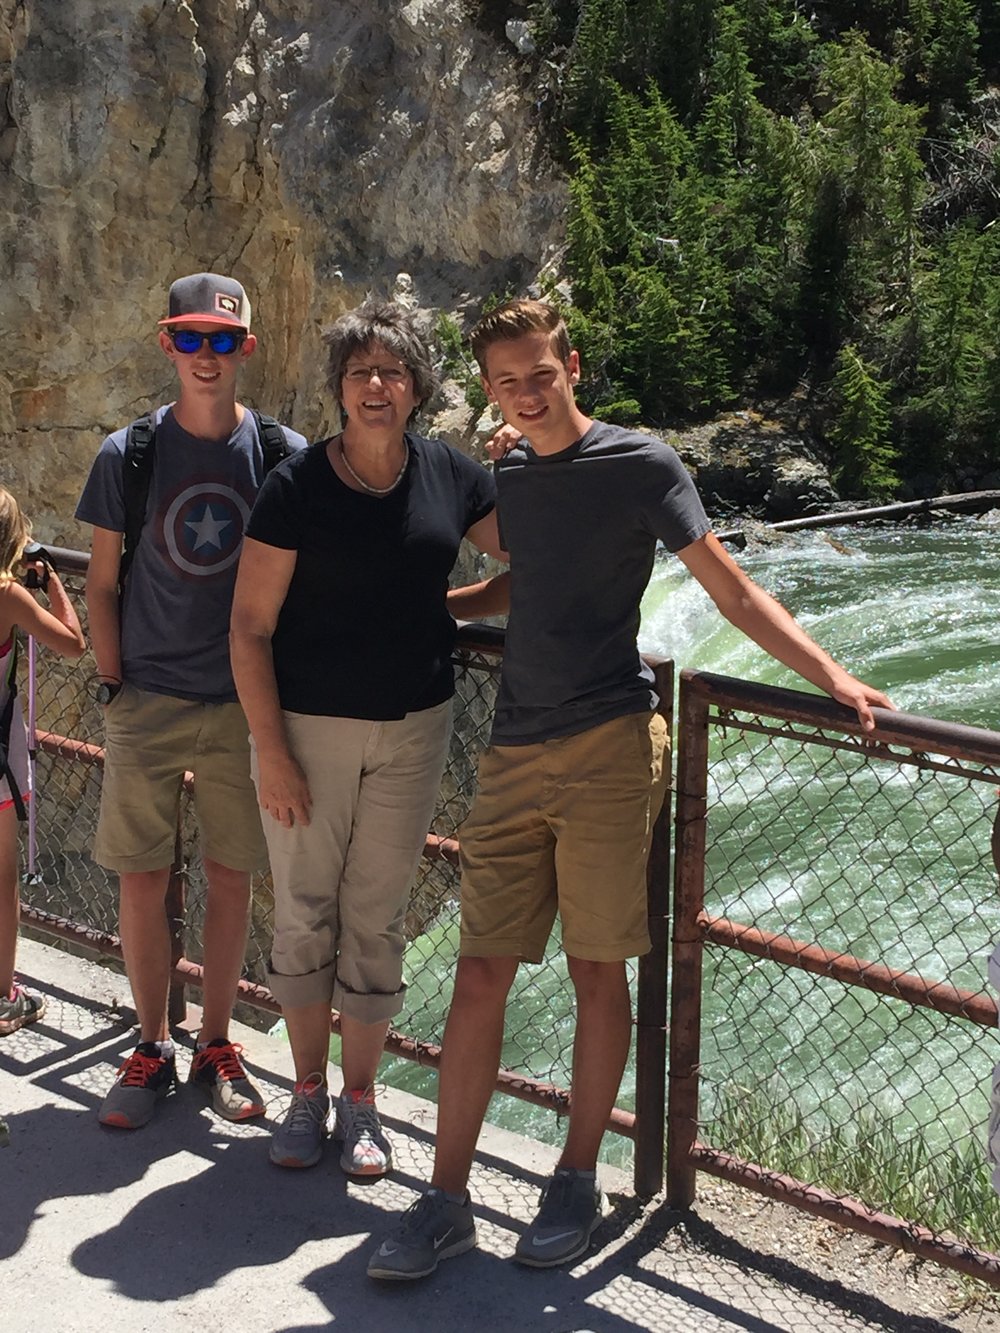  Happy to be here with these wonderful young men.&nbsp; Brink of Lower Falls - YNP 